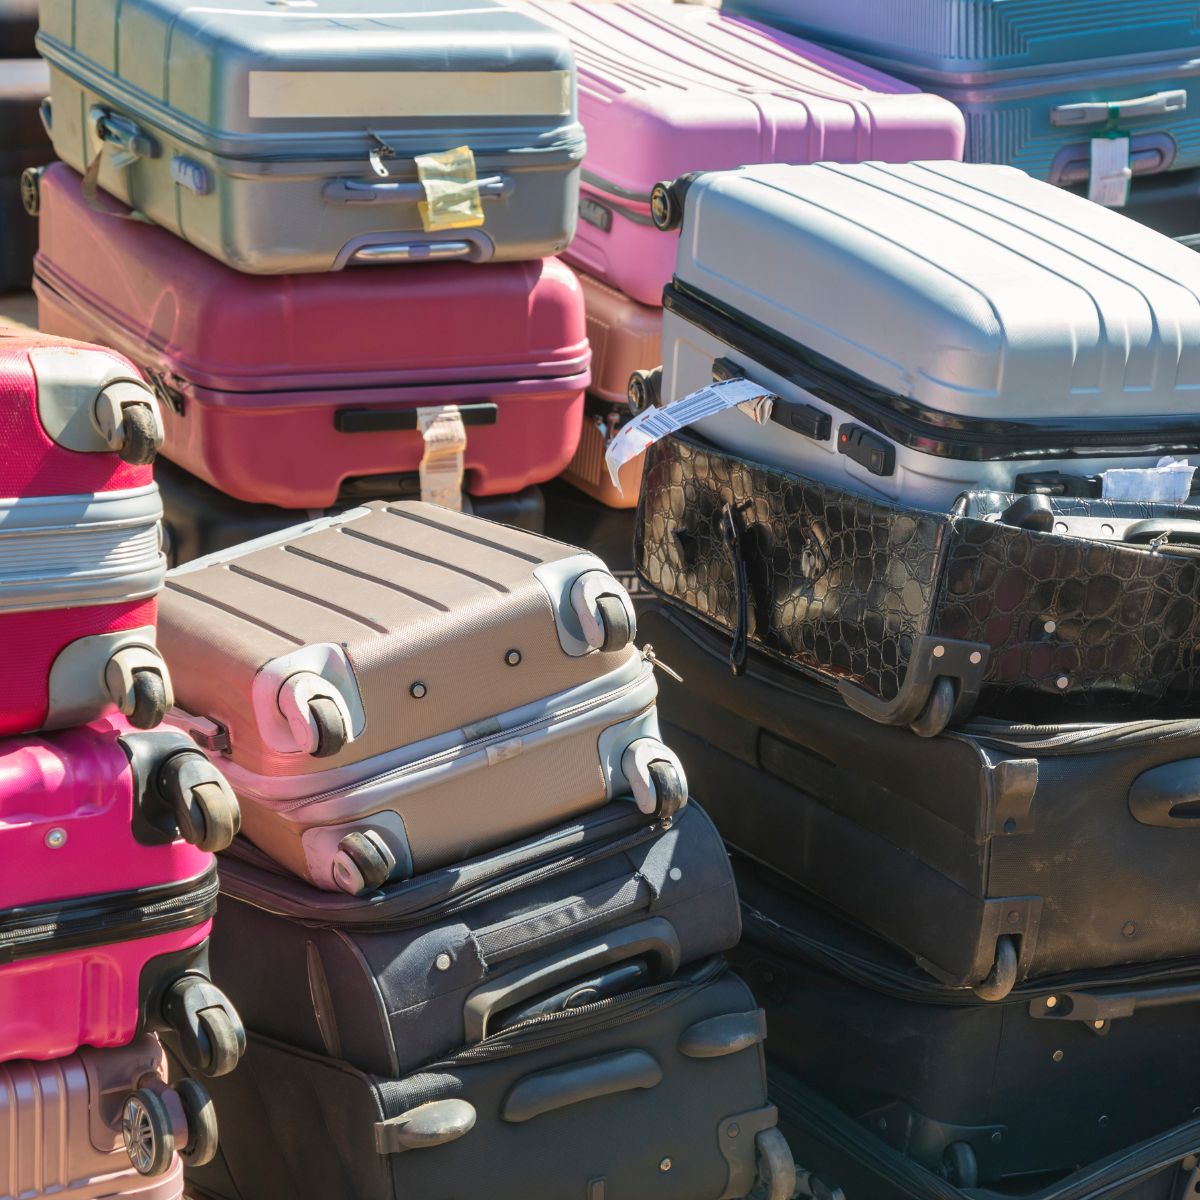 A pile of suitcases.